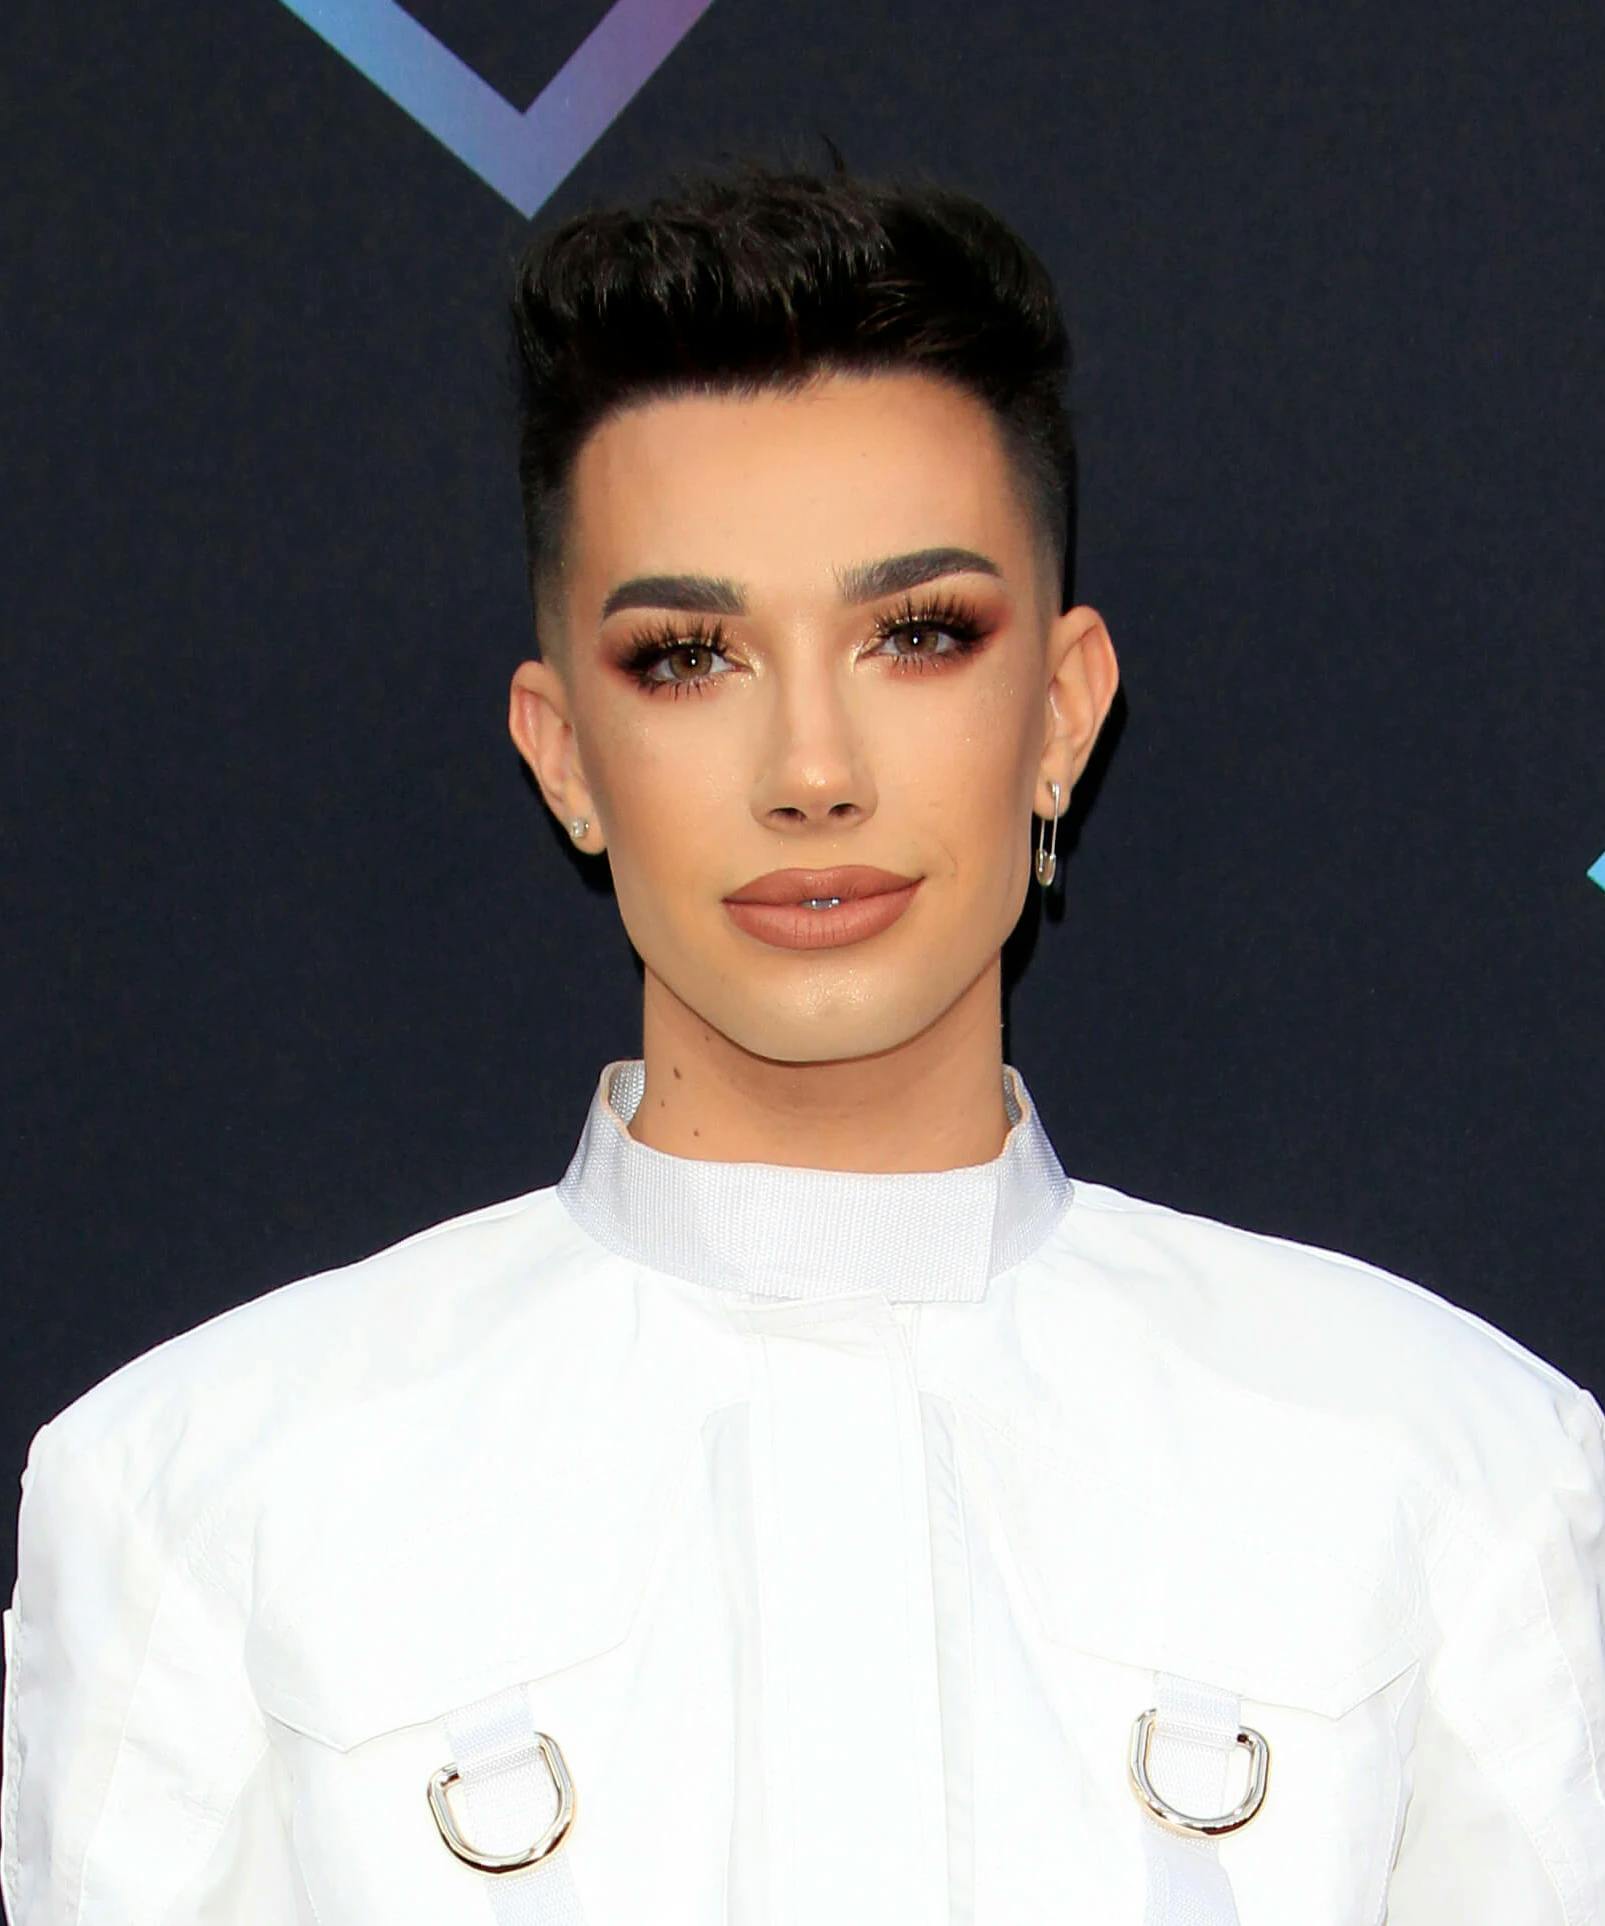 James Charles Is In Trouble Again. Is His Reckoning Finally Here?